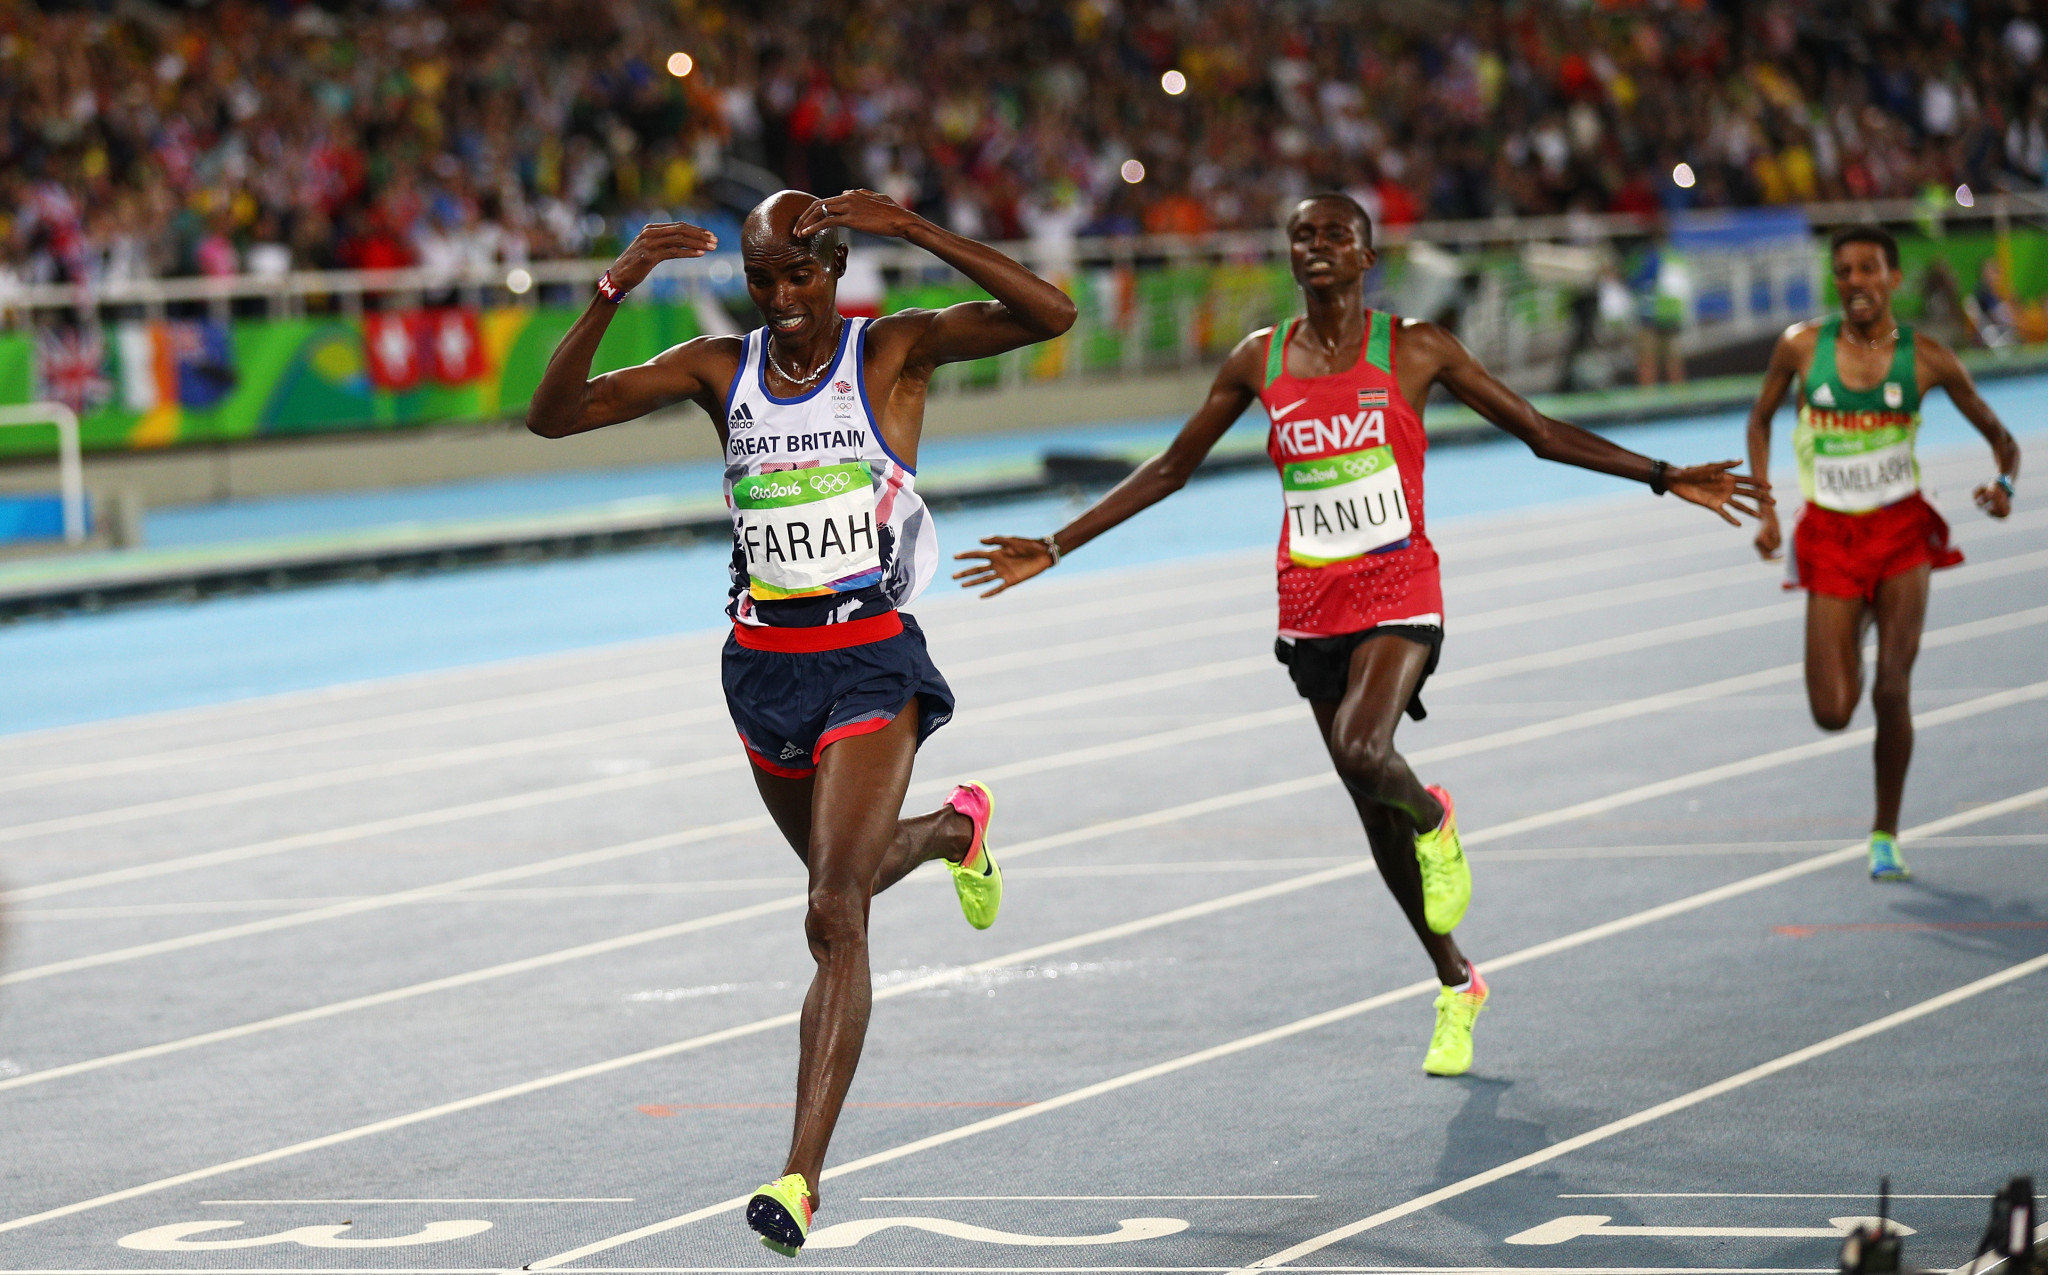 Sir Mo Farah celebrates after winning 10,000m gold at Rio 2016 ©Getty Images